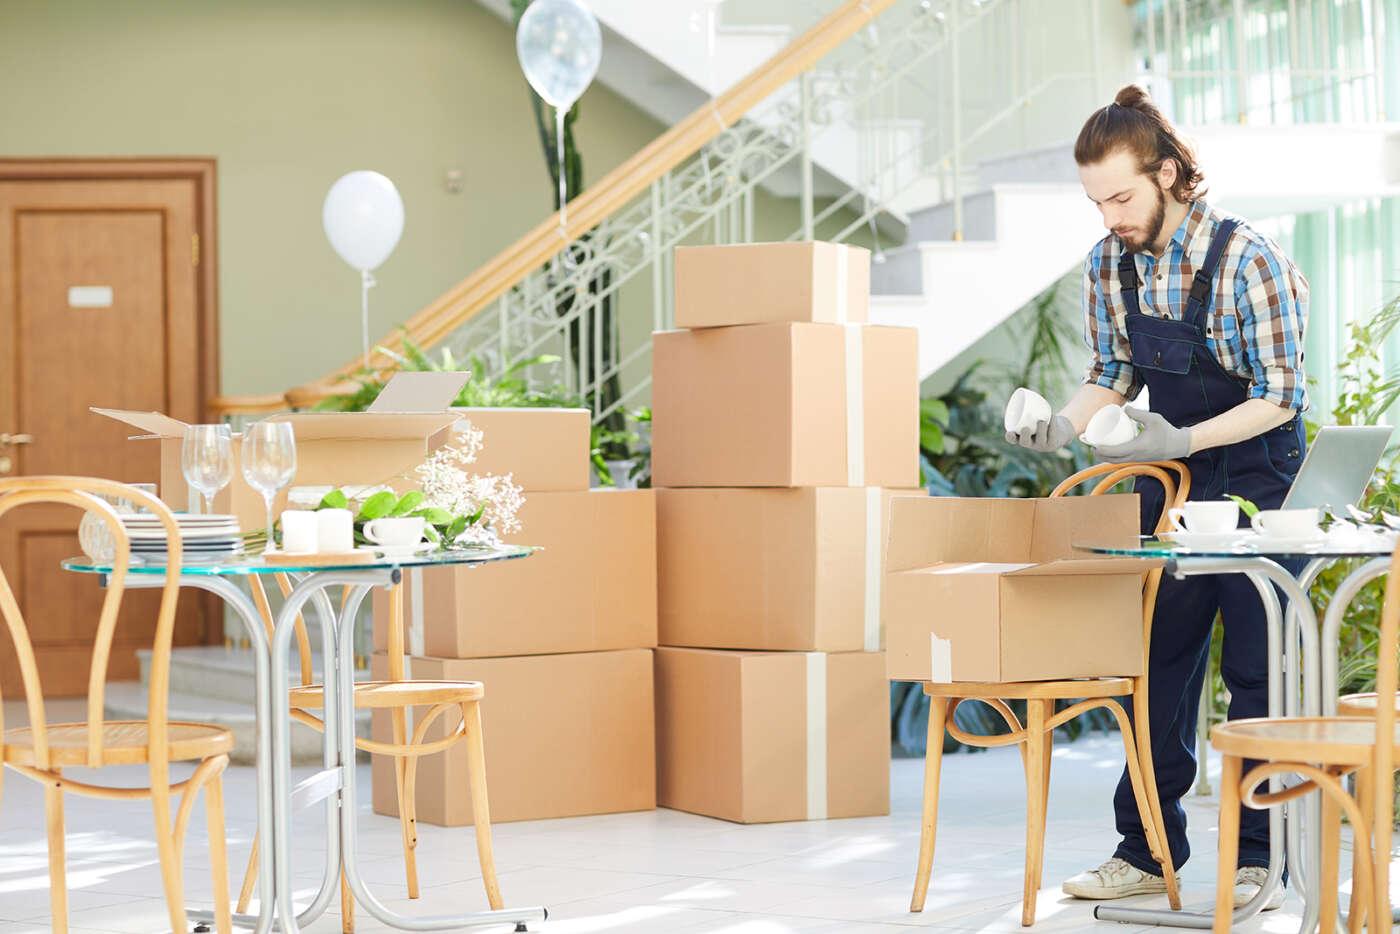 10 reasons to hire professional packers and movers young mover unpacking boxes in new restaurant 2021 04 02 20 38 16 utc